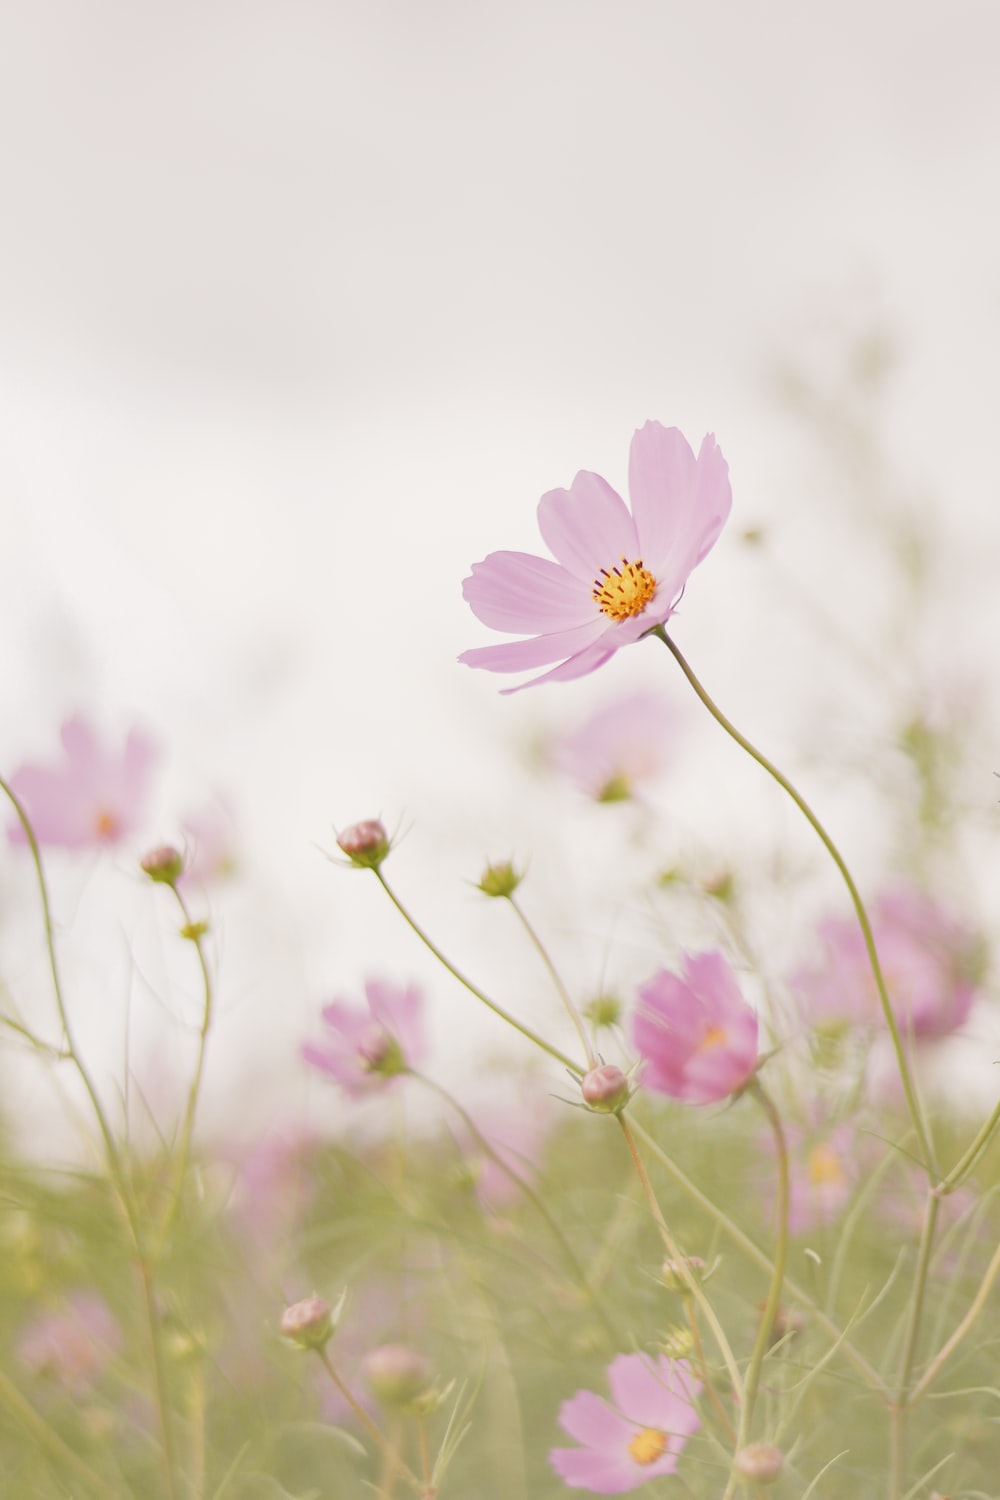 Cosmos Flower Picture. Download Free Image